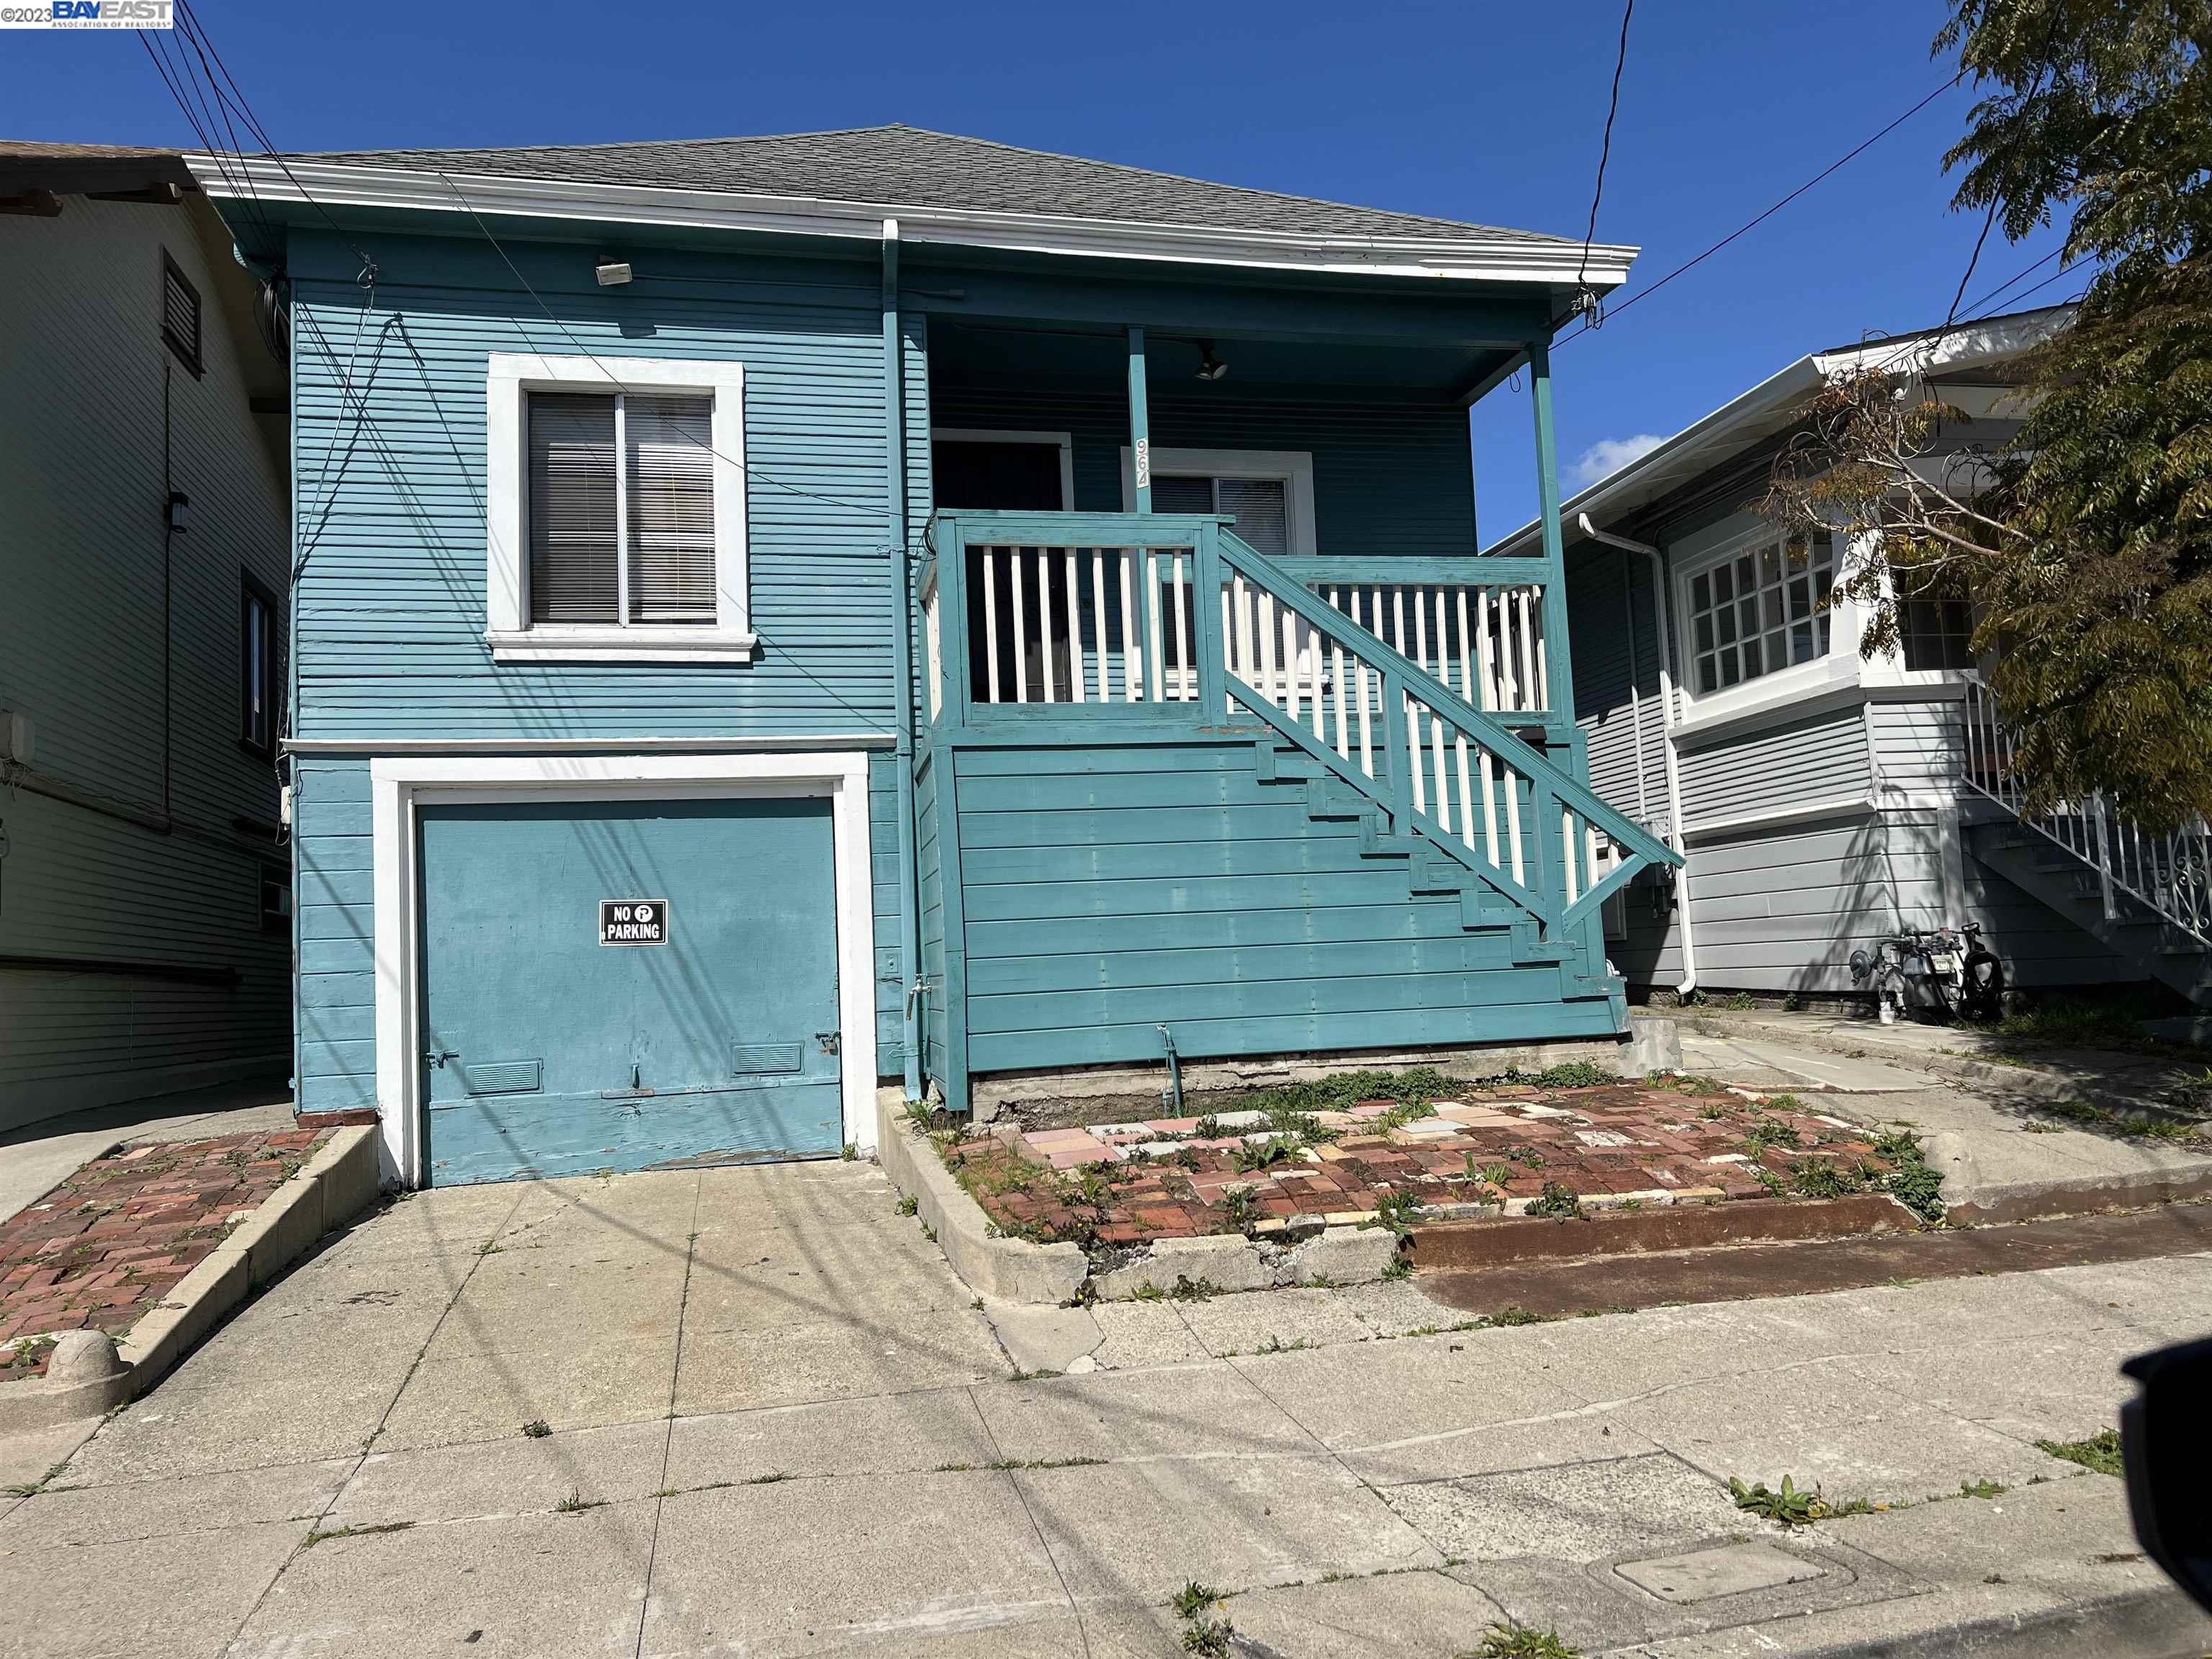 Absolute Bargain!  Unbelievable Price!  Great Deal on a Super Home in a Great Area.  Hurry it will not last long at the Low, Low, Price.  Don't miss this Golden Opportunity for a Fantastic Deal in a Wonderful, Quiet, Neighborhood!